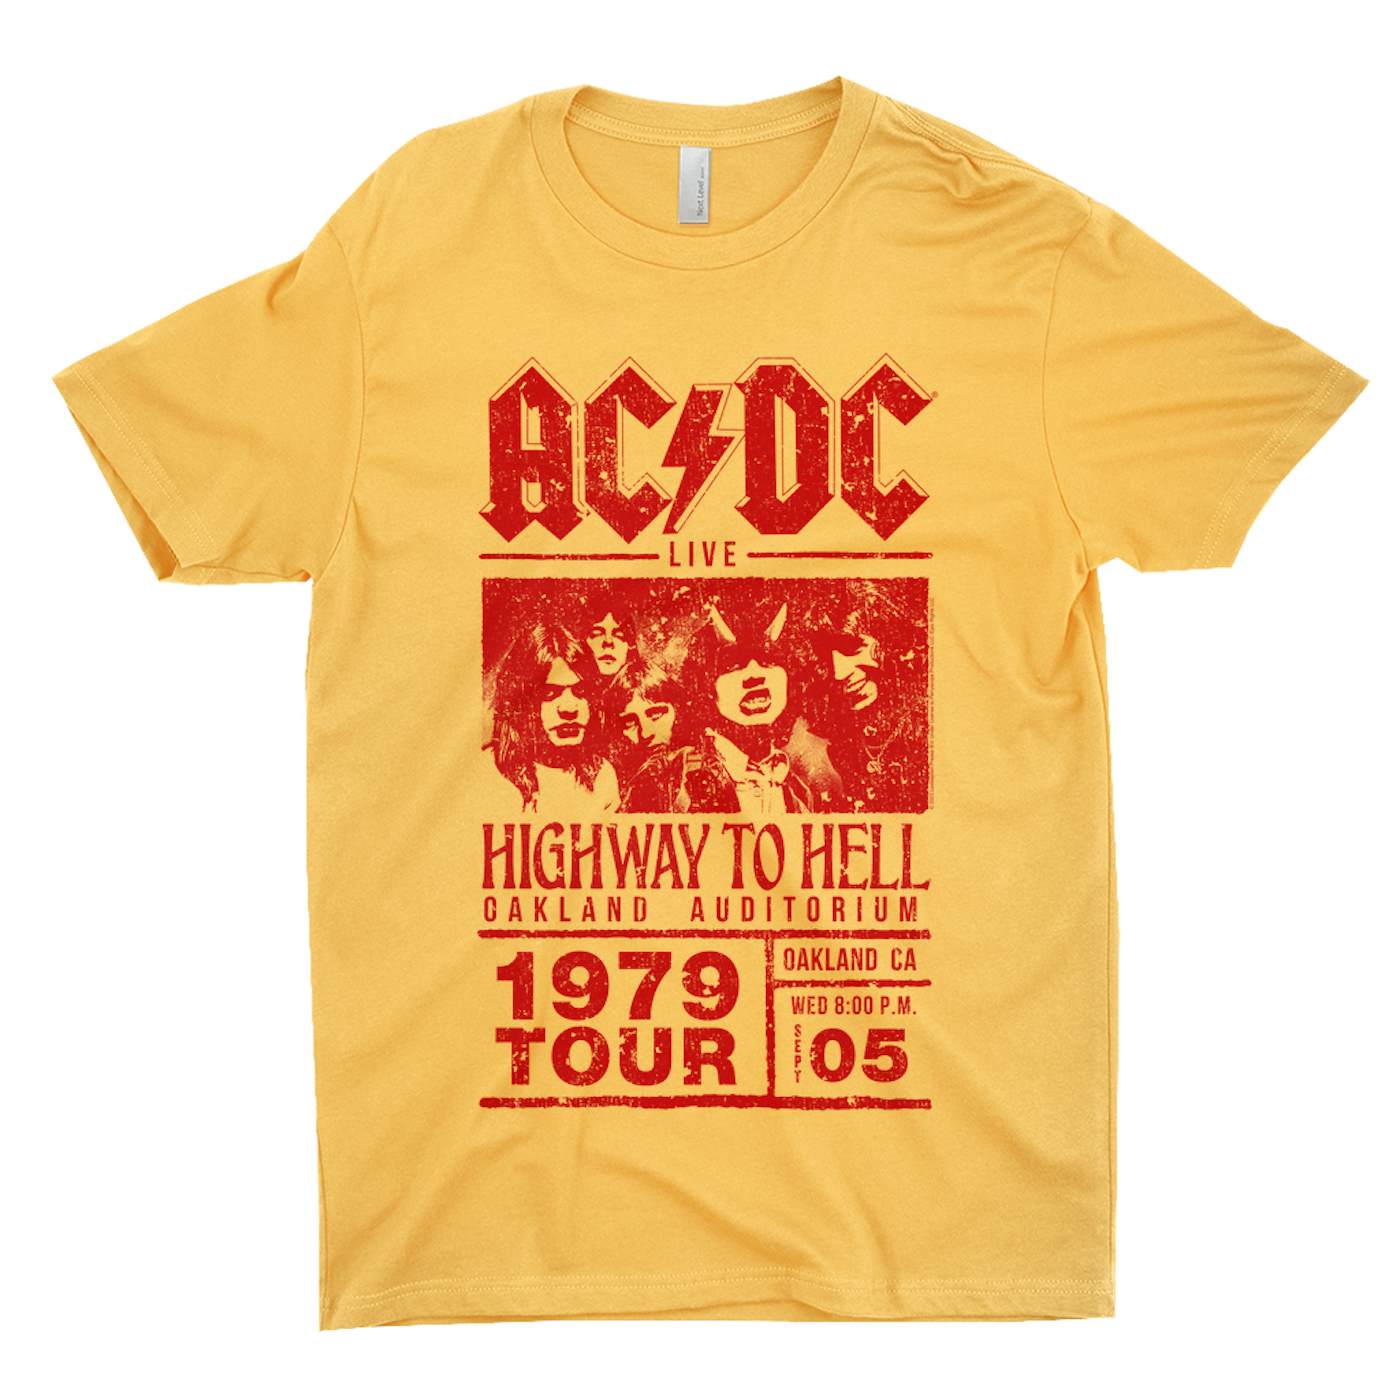 AC/DC T-Shirt | Highway To Hell Oakland Concert ACDC Shirt